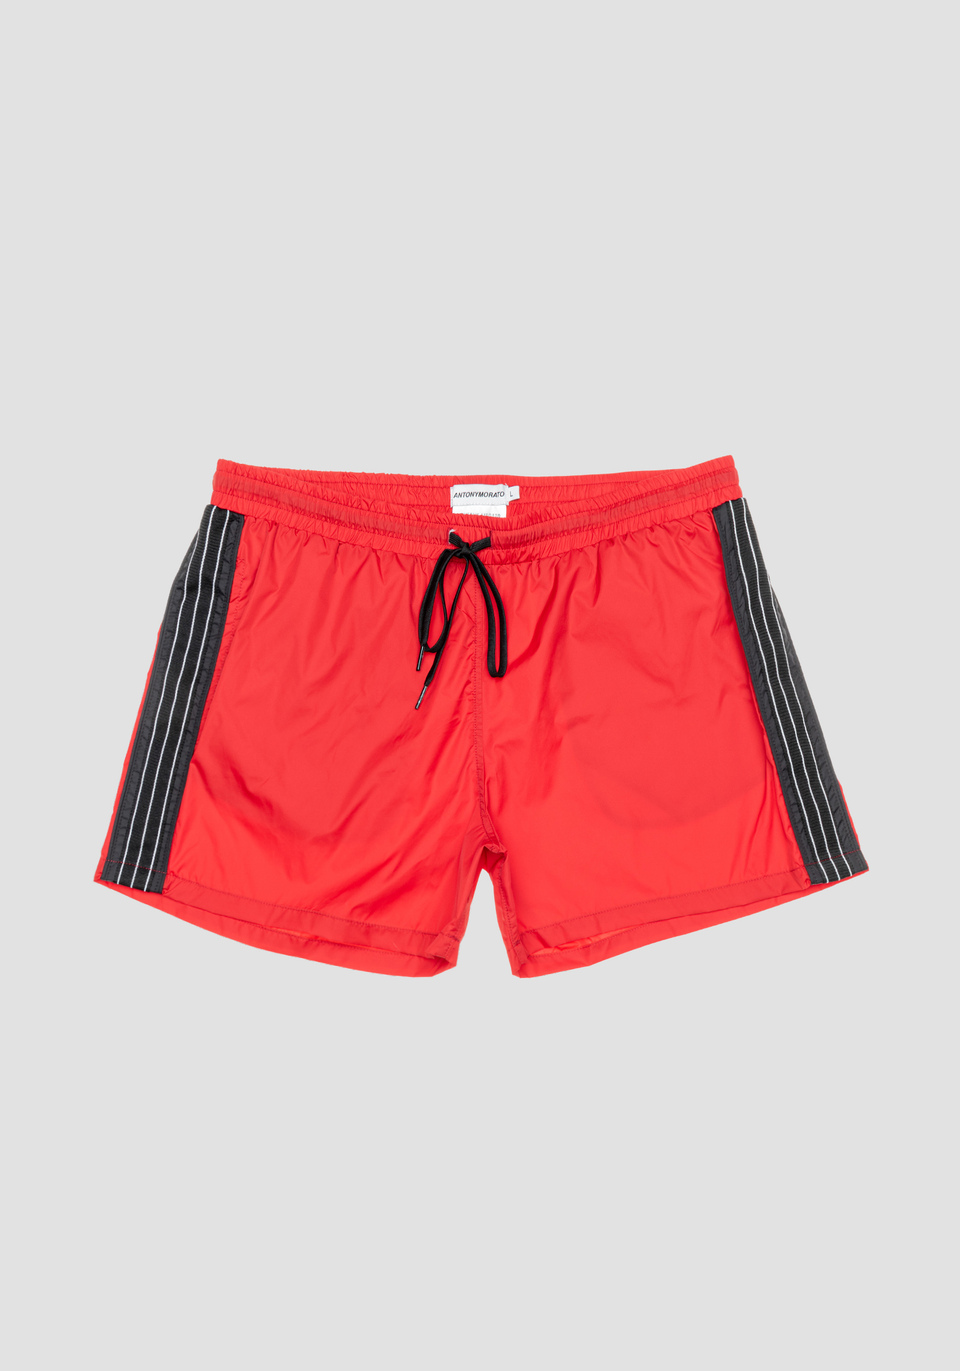 SLIM-FIT SWIMMING TRUNKS IN TECHNICAL FABRIC WITH SIDE BANDS - Antony Morato Online Shop